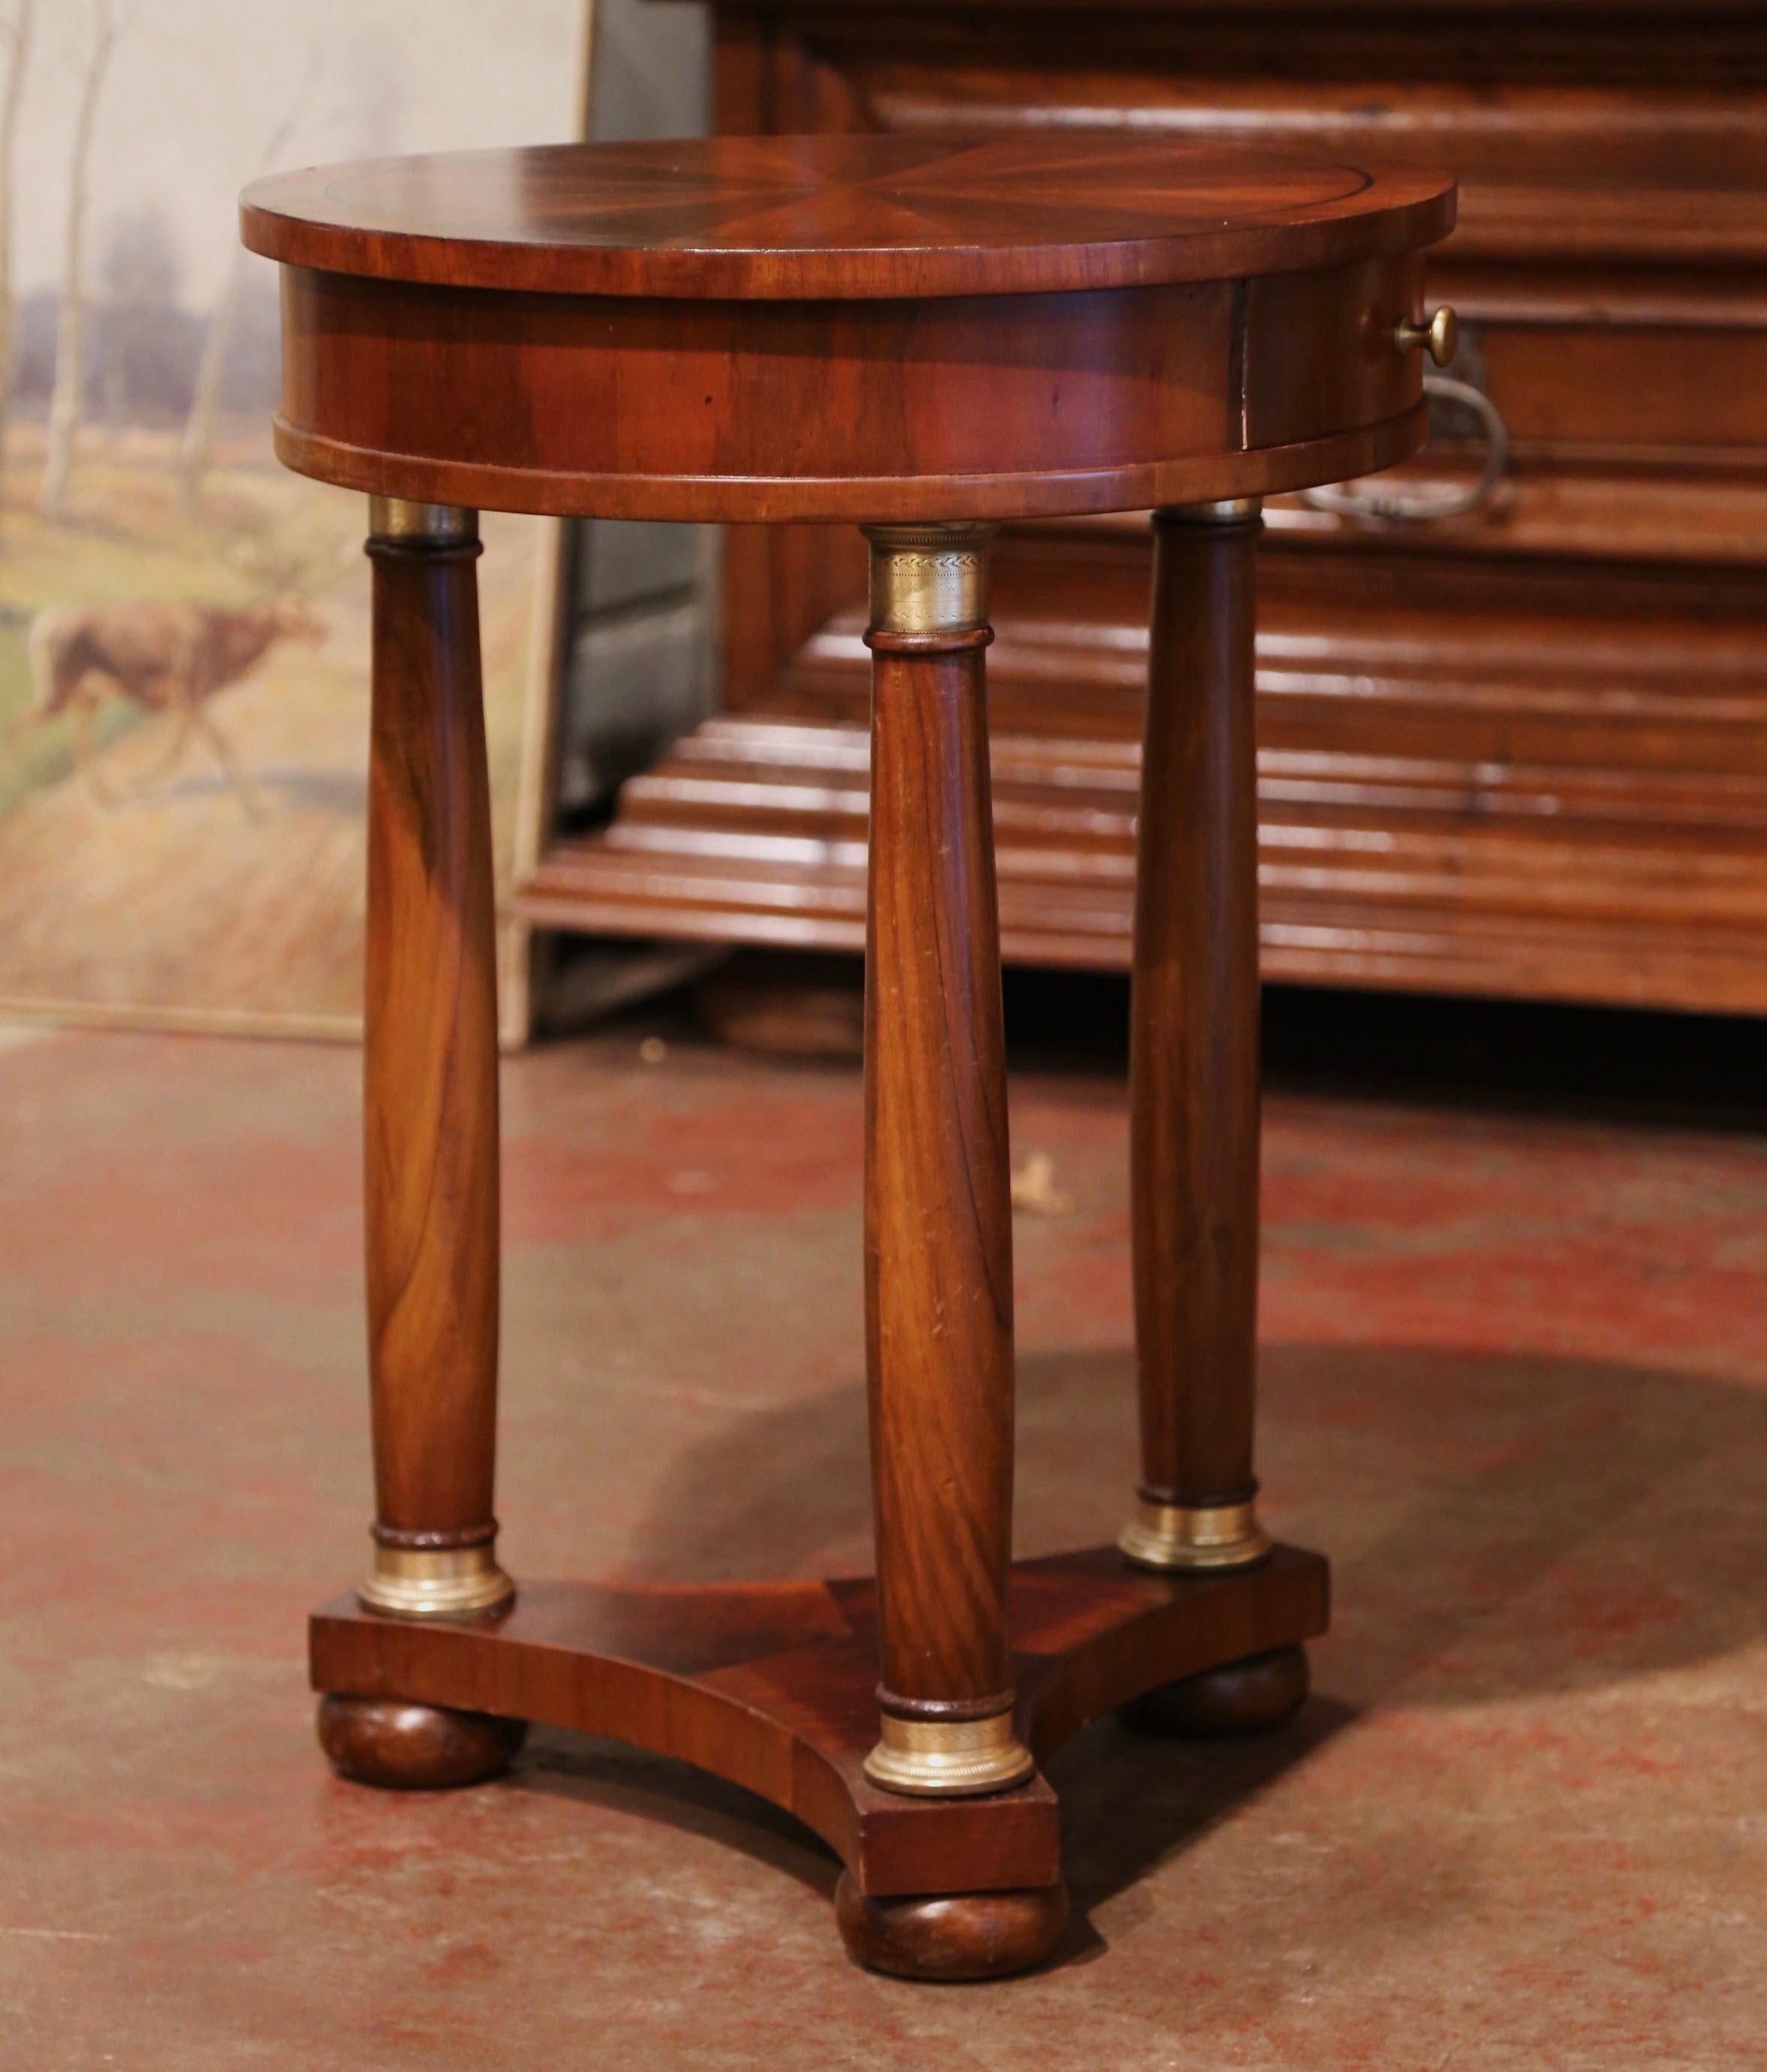 Crafted in France circa 1880, the elegant antique gueridon stands on three turned legs with bottom shaped stretcher and ending with bun feet. Each columnar support is dressed with patinated gilt brass rings at the base and at the neck. Over a